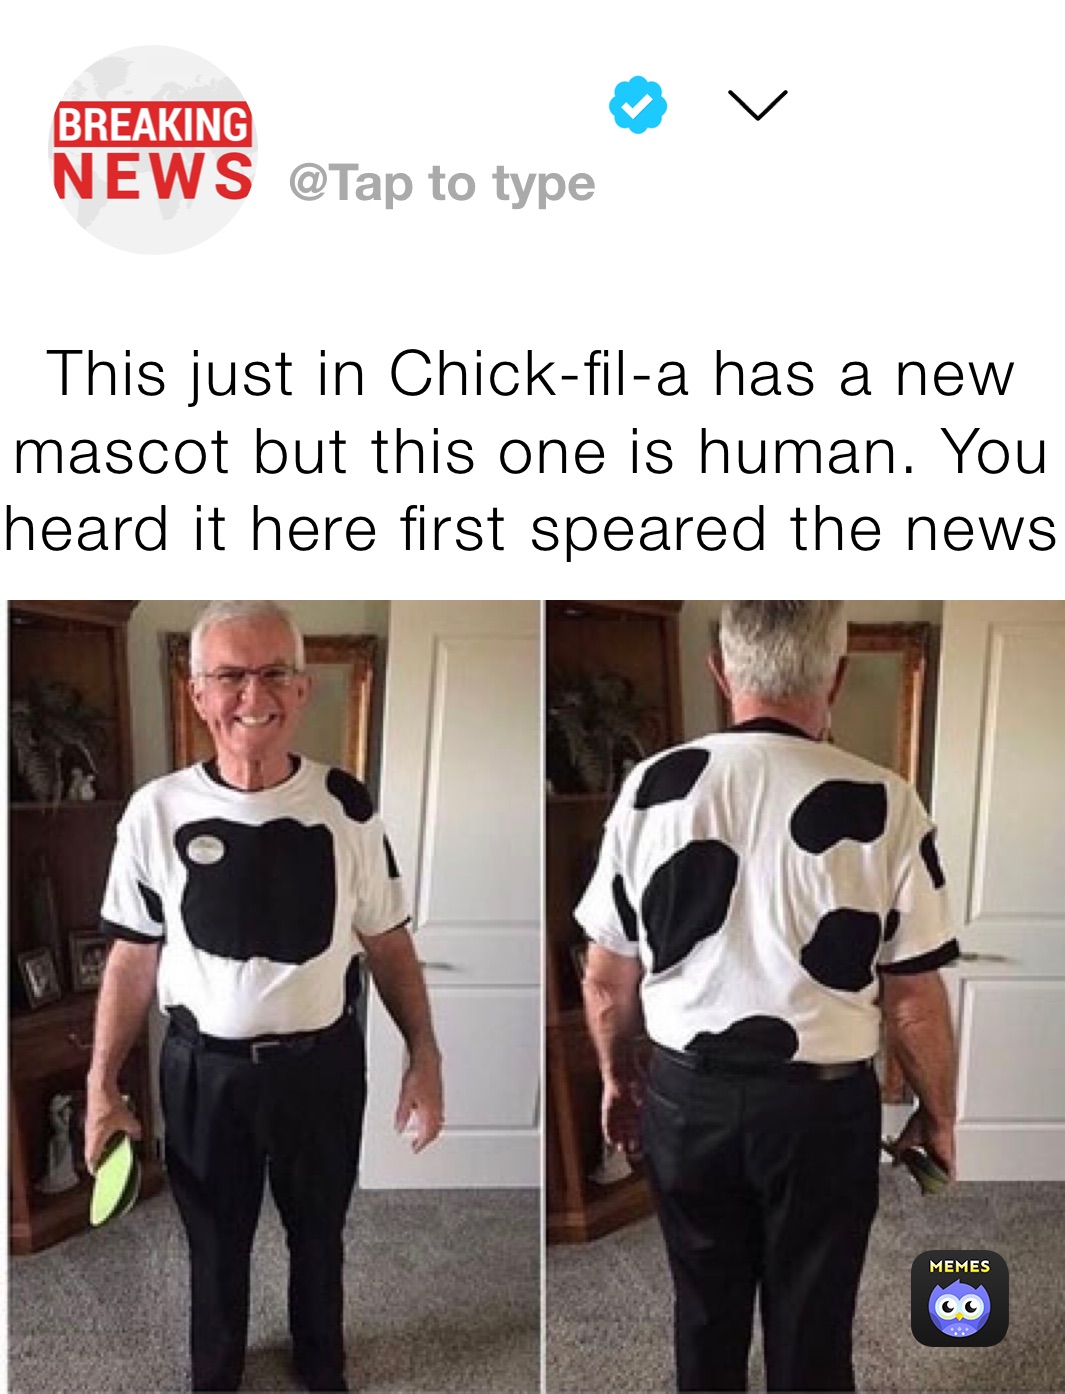 This just in Chick-fil-a has a new mascot but this one is human. You heard it here first speared the news